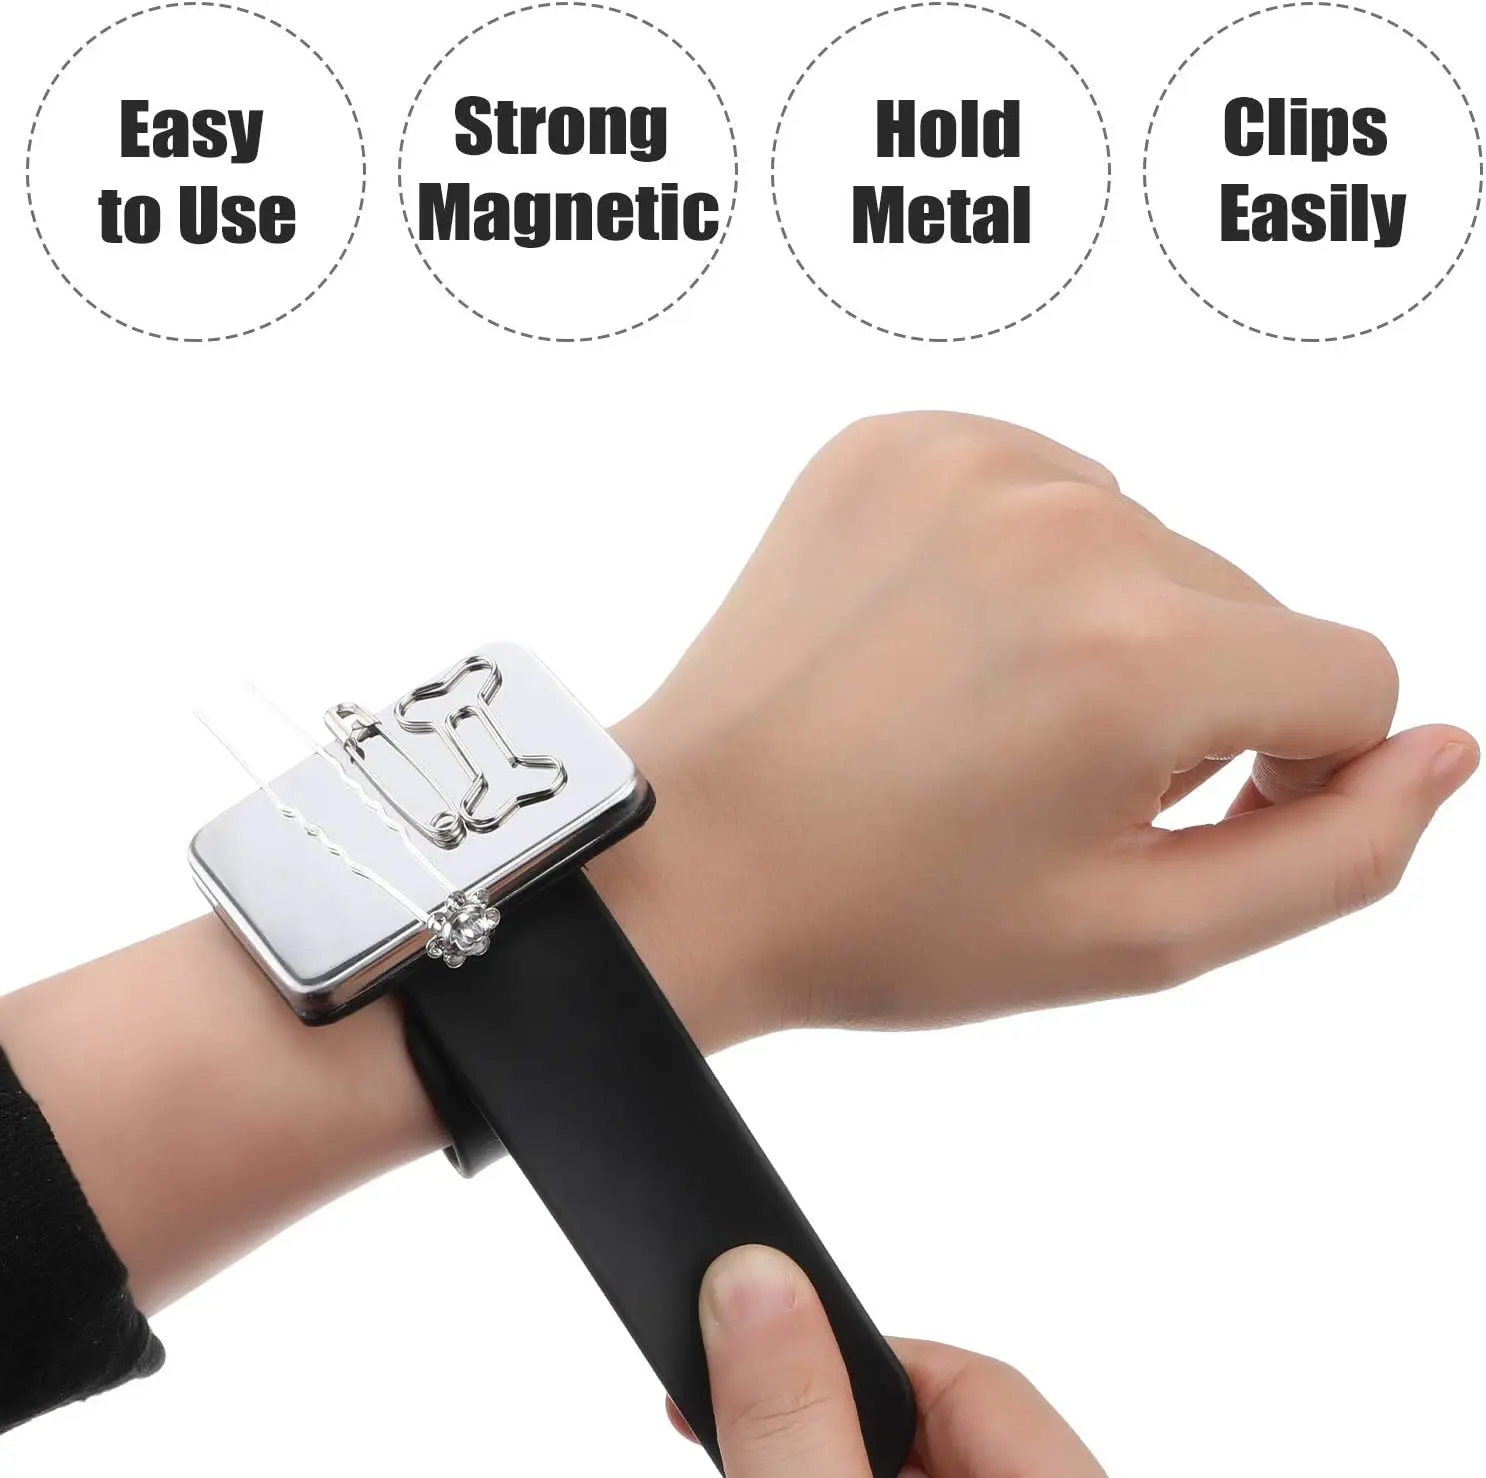 Professional Magnetic Bracelet Wrist Band Strap Salon Hair Accessories Hair Clip Holder Barber Hairdressing Styling Tools